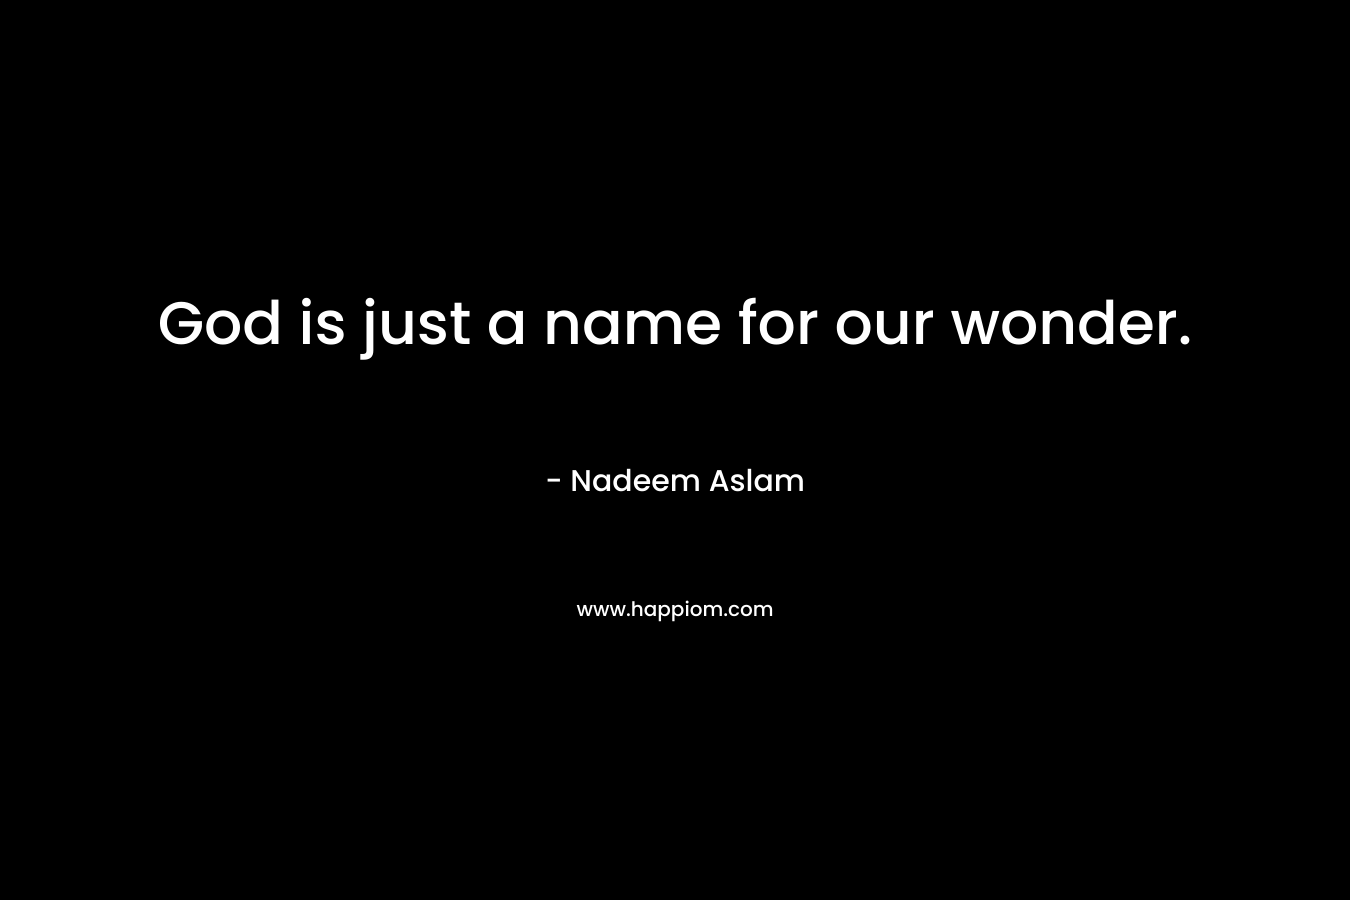 God is just a name for our wonder. – Nadeem Aslam